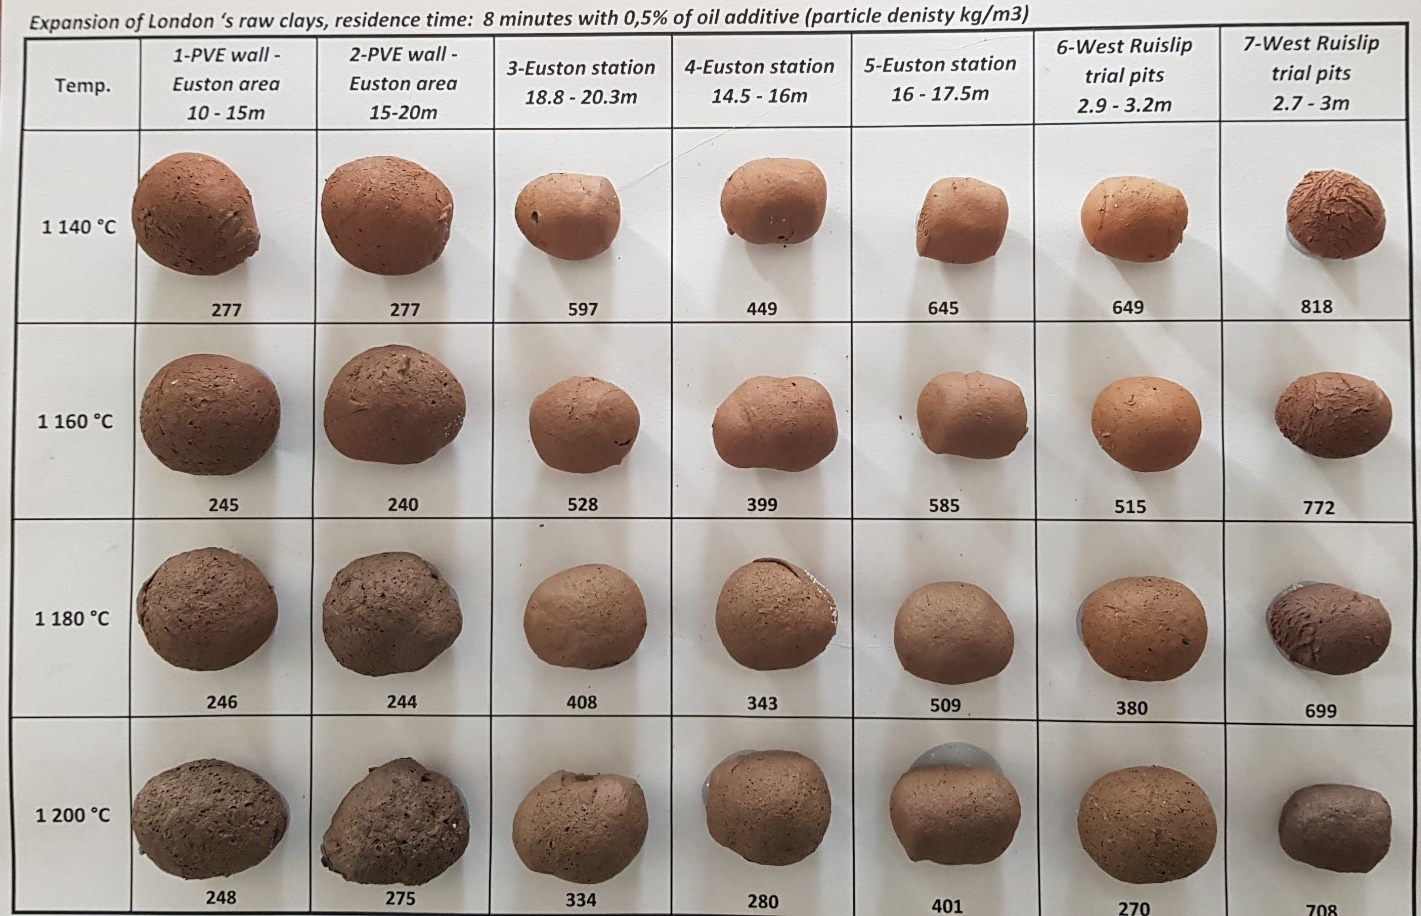 Picture of  London clay pellets from seven area  showing  firing temperatures, particle densities and shapes of expanded London Clay aggregate